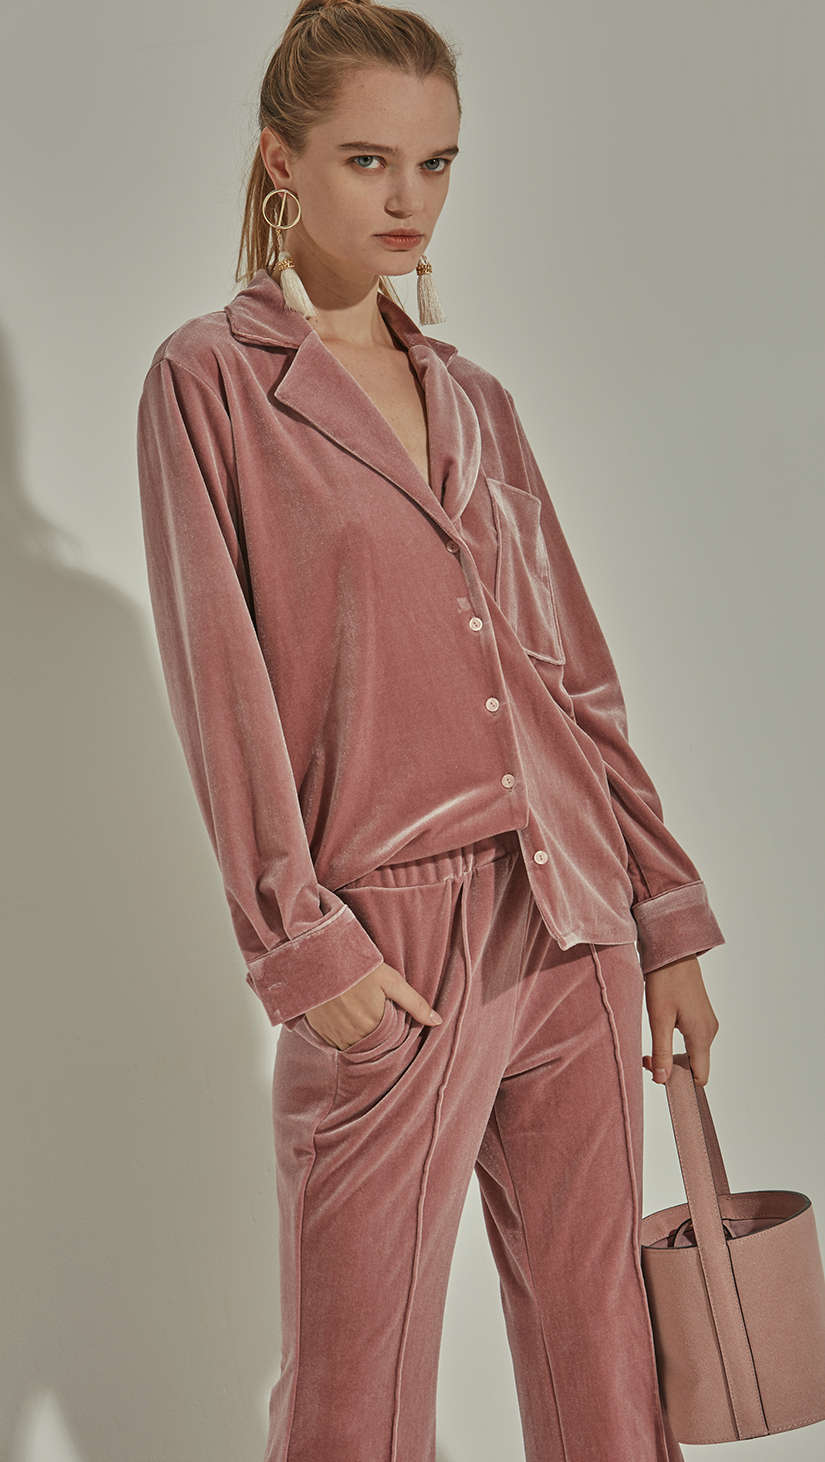 The Courrie Top is pyjama-inspired in lustrous duty rose velvet. With a notched collar, long sleeves with buttoned cuffs, one front welt pockets, straight hem. Relaxed fit. Front button down closure.